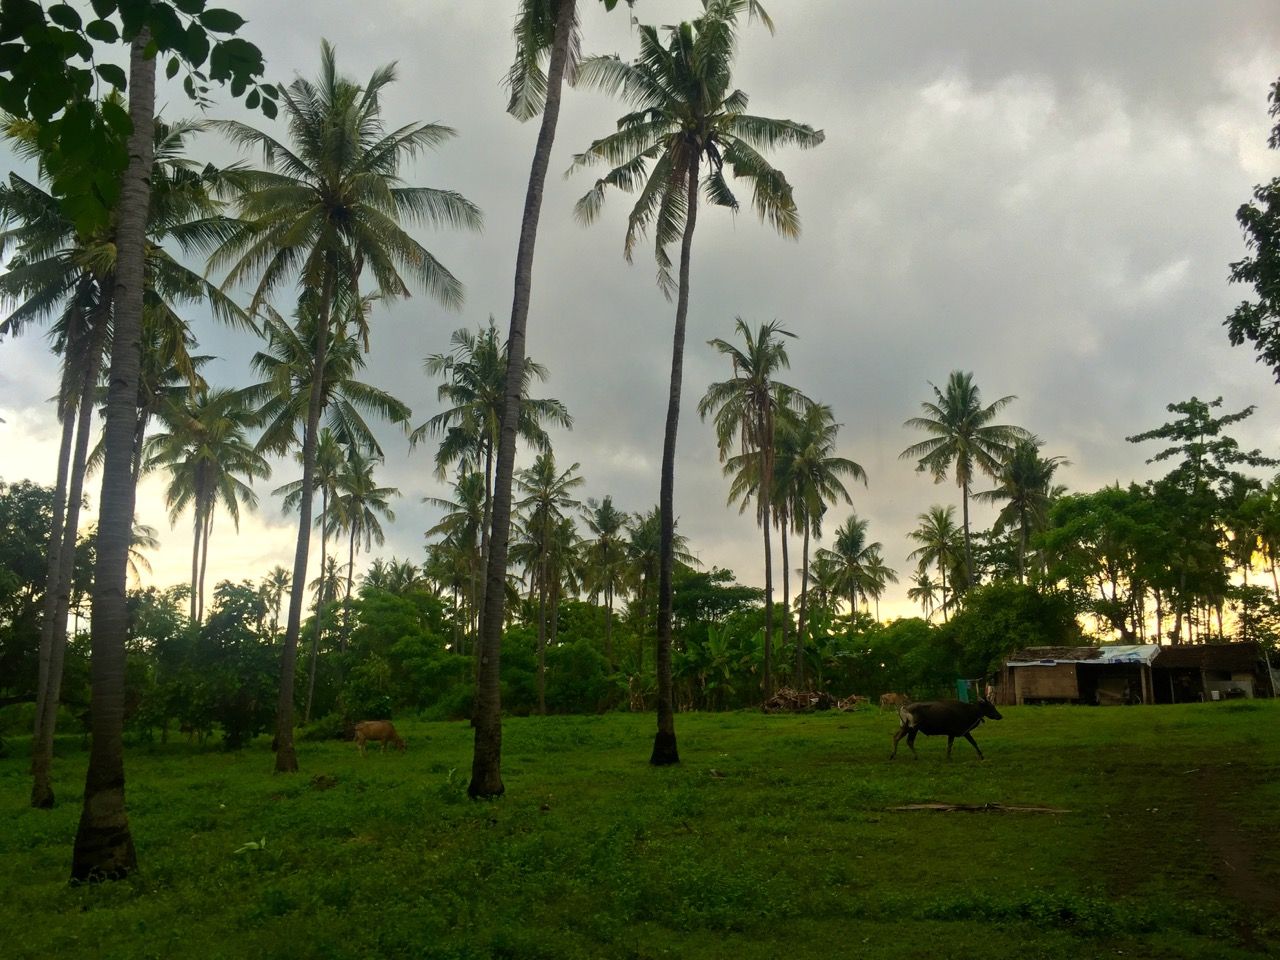 A field with cows and palm trees.